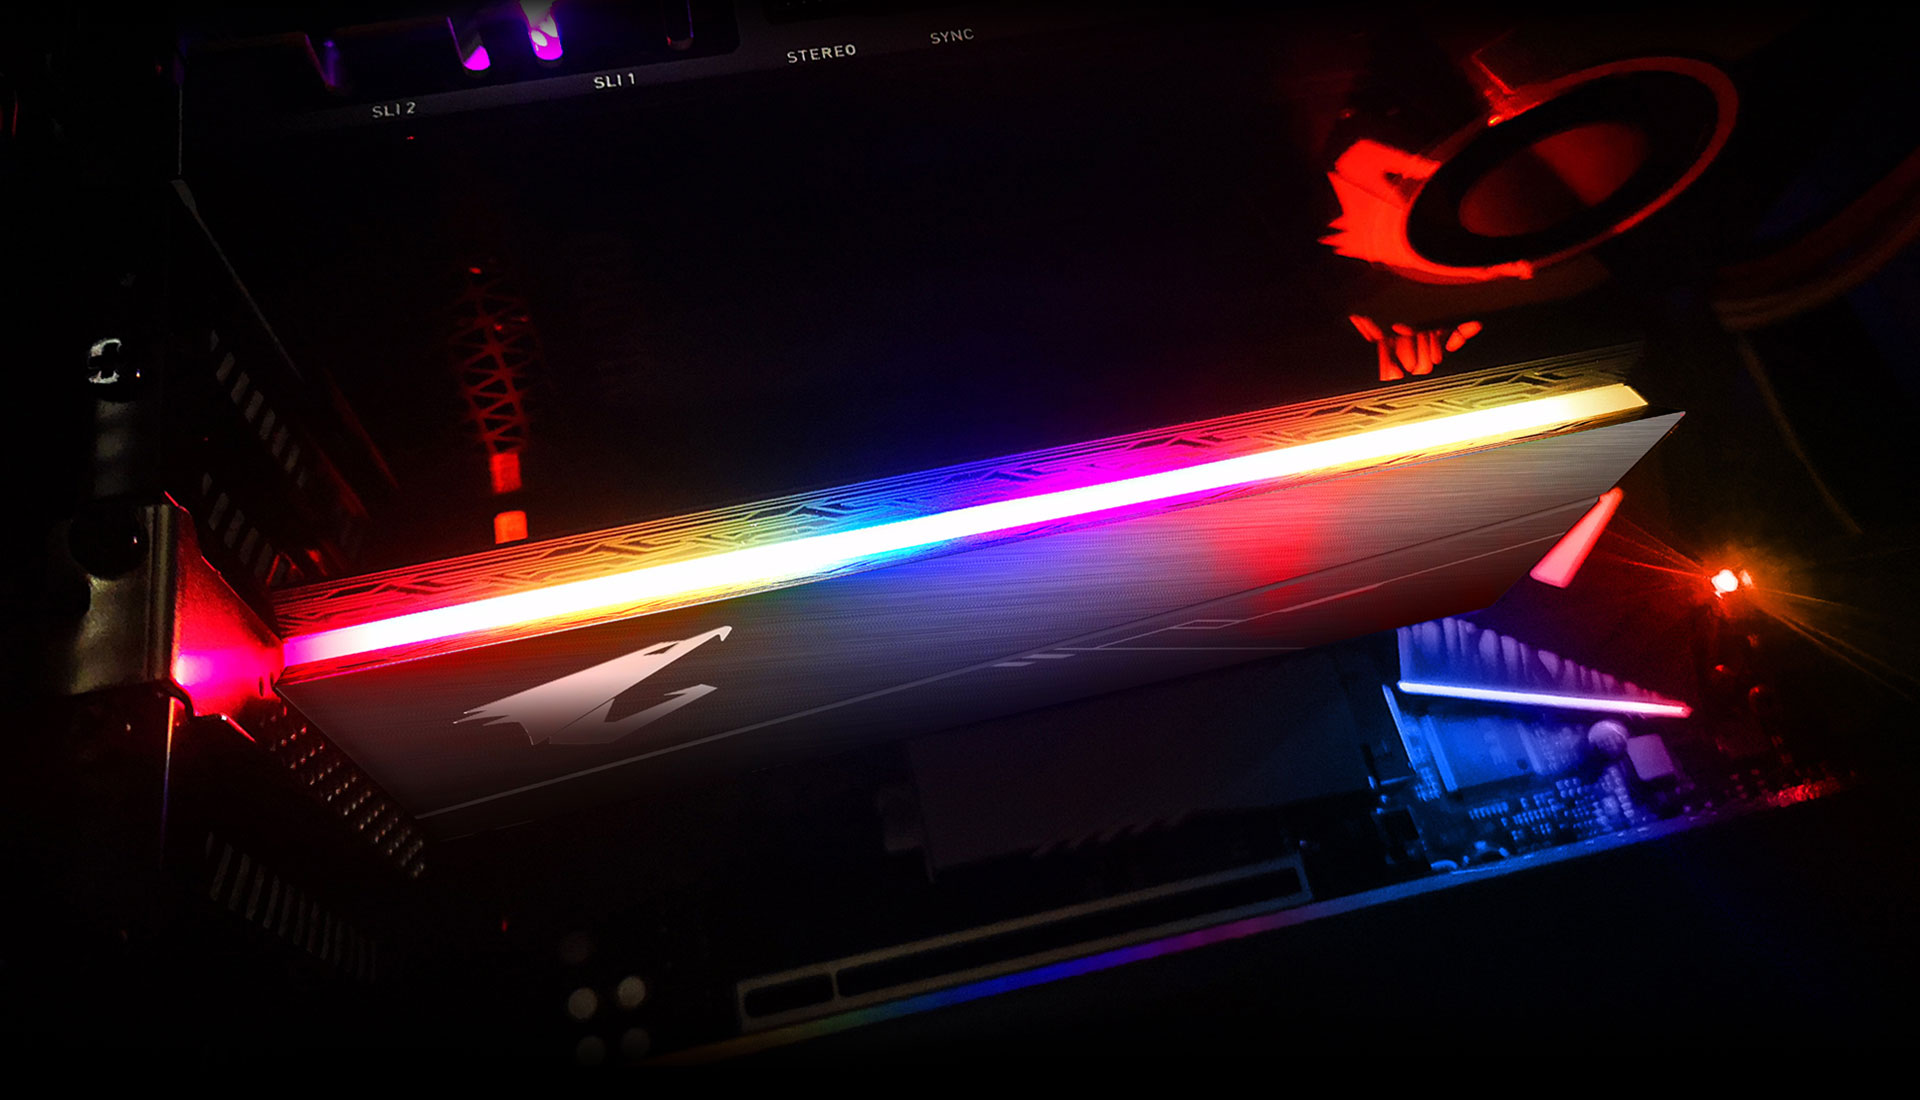 Available Astrolabe Observe AORUS RGB AIC NVMe SSD 1TB Key Features | SSD - GIGABYTE Global